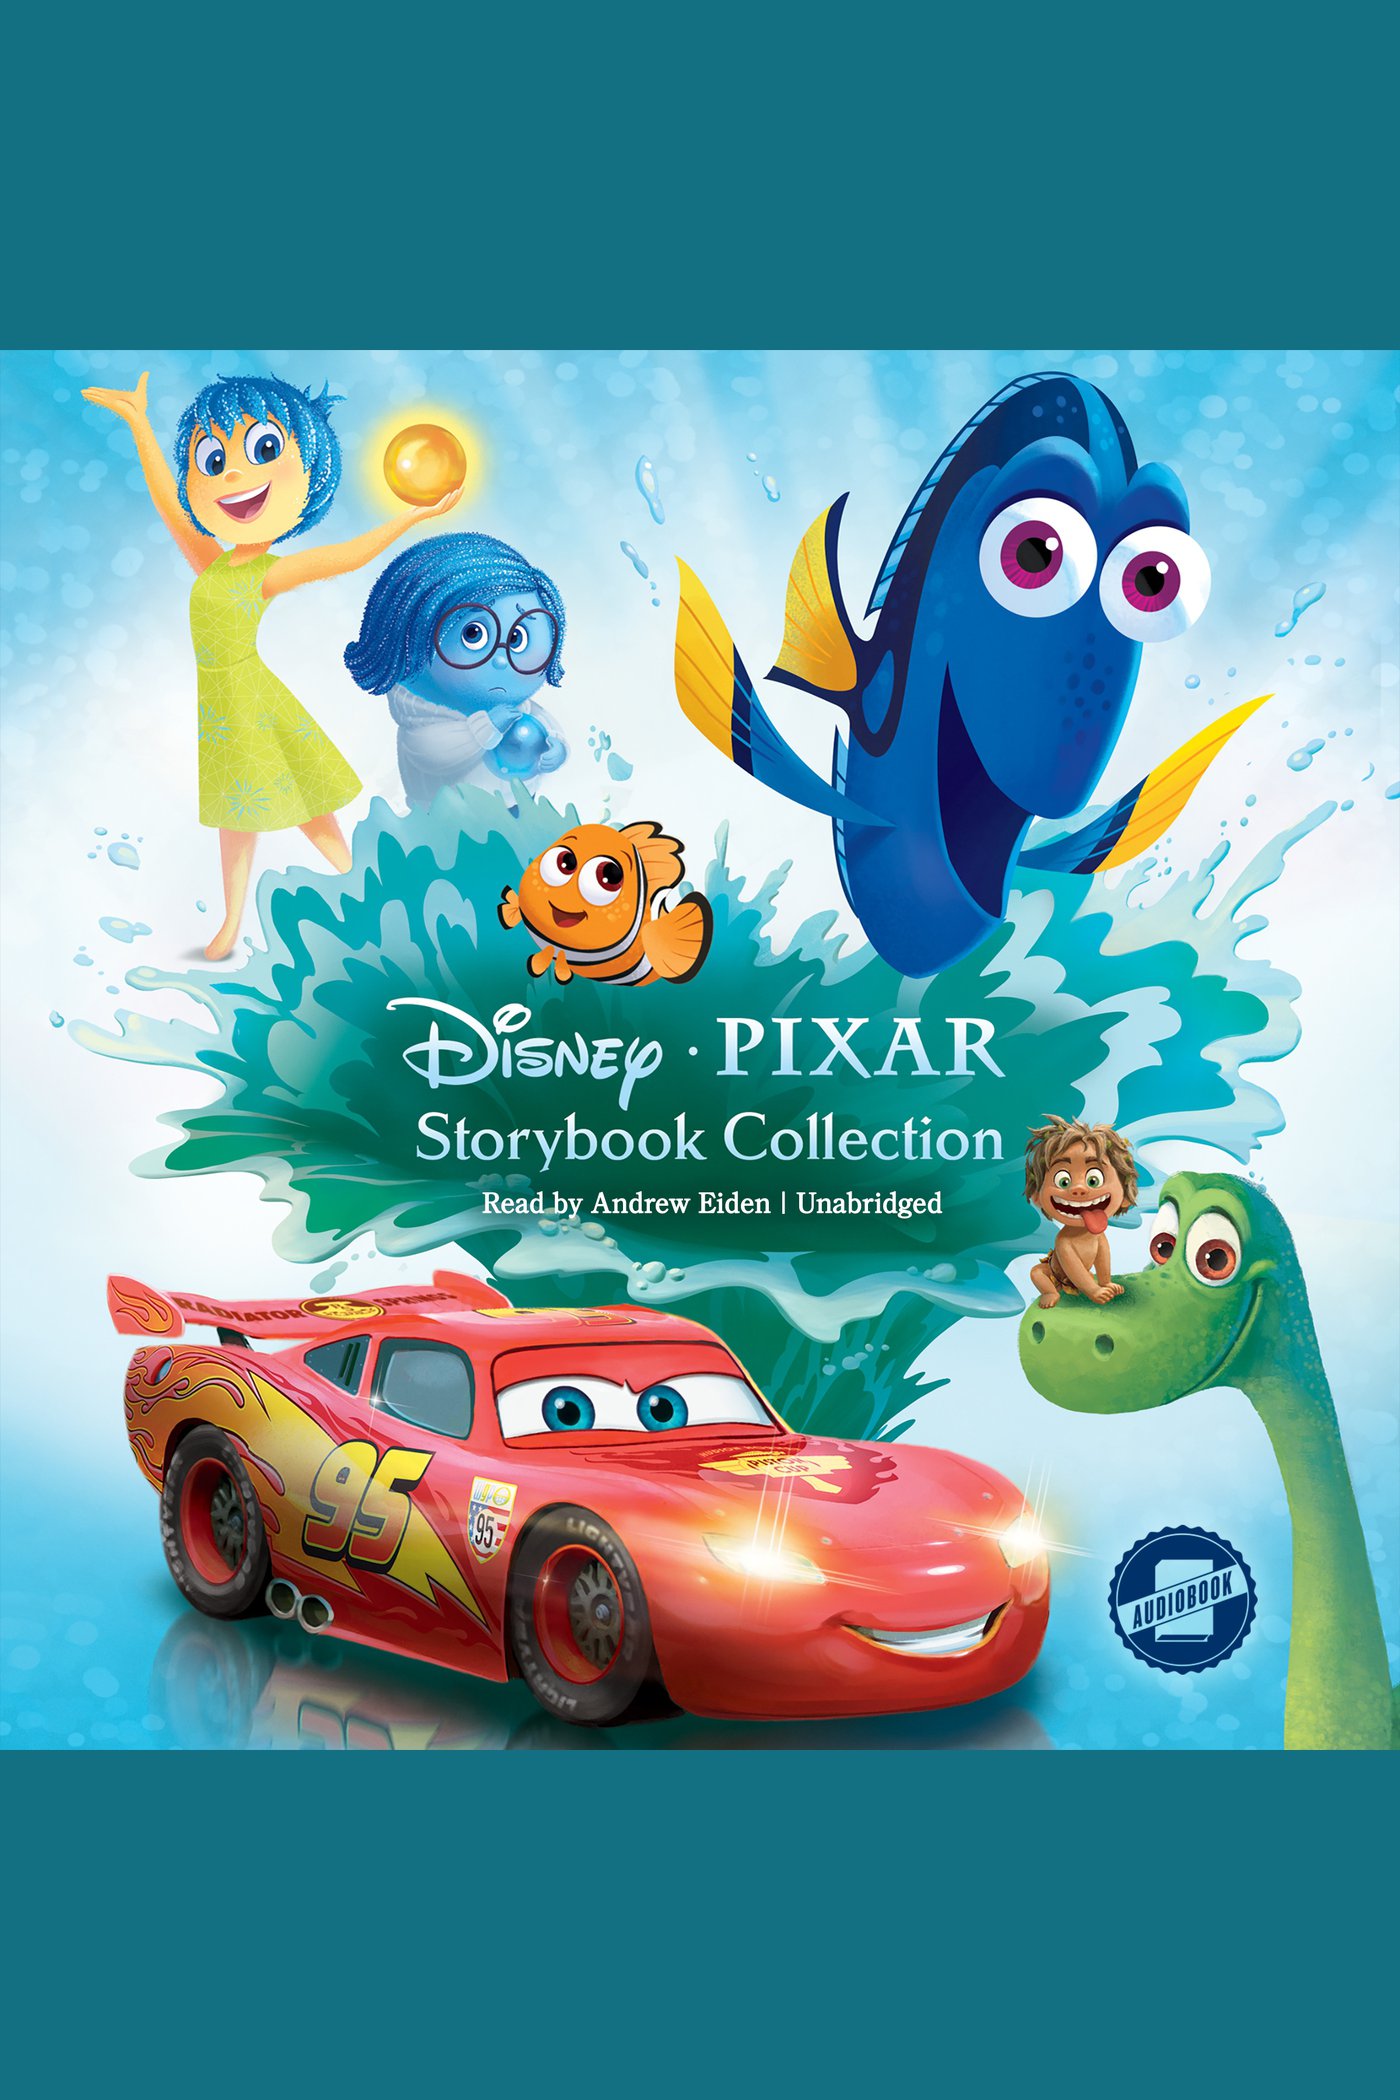 Disney*Pixar Storybook Collection cover image